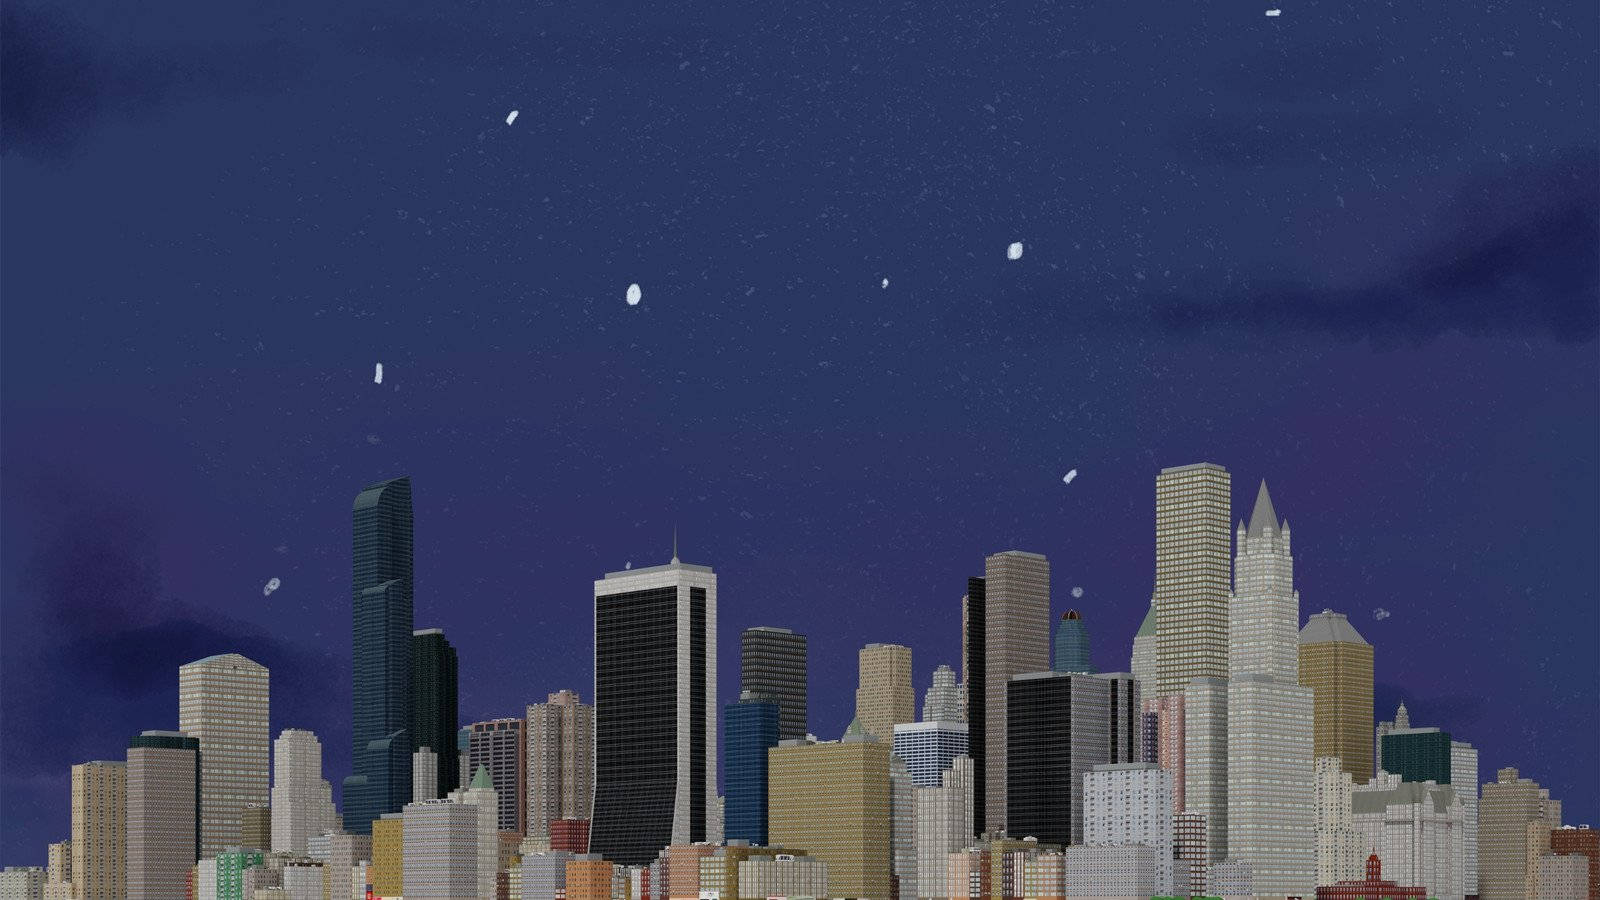 Step into the lights and dazzle of a modern city Wallpaper